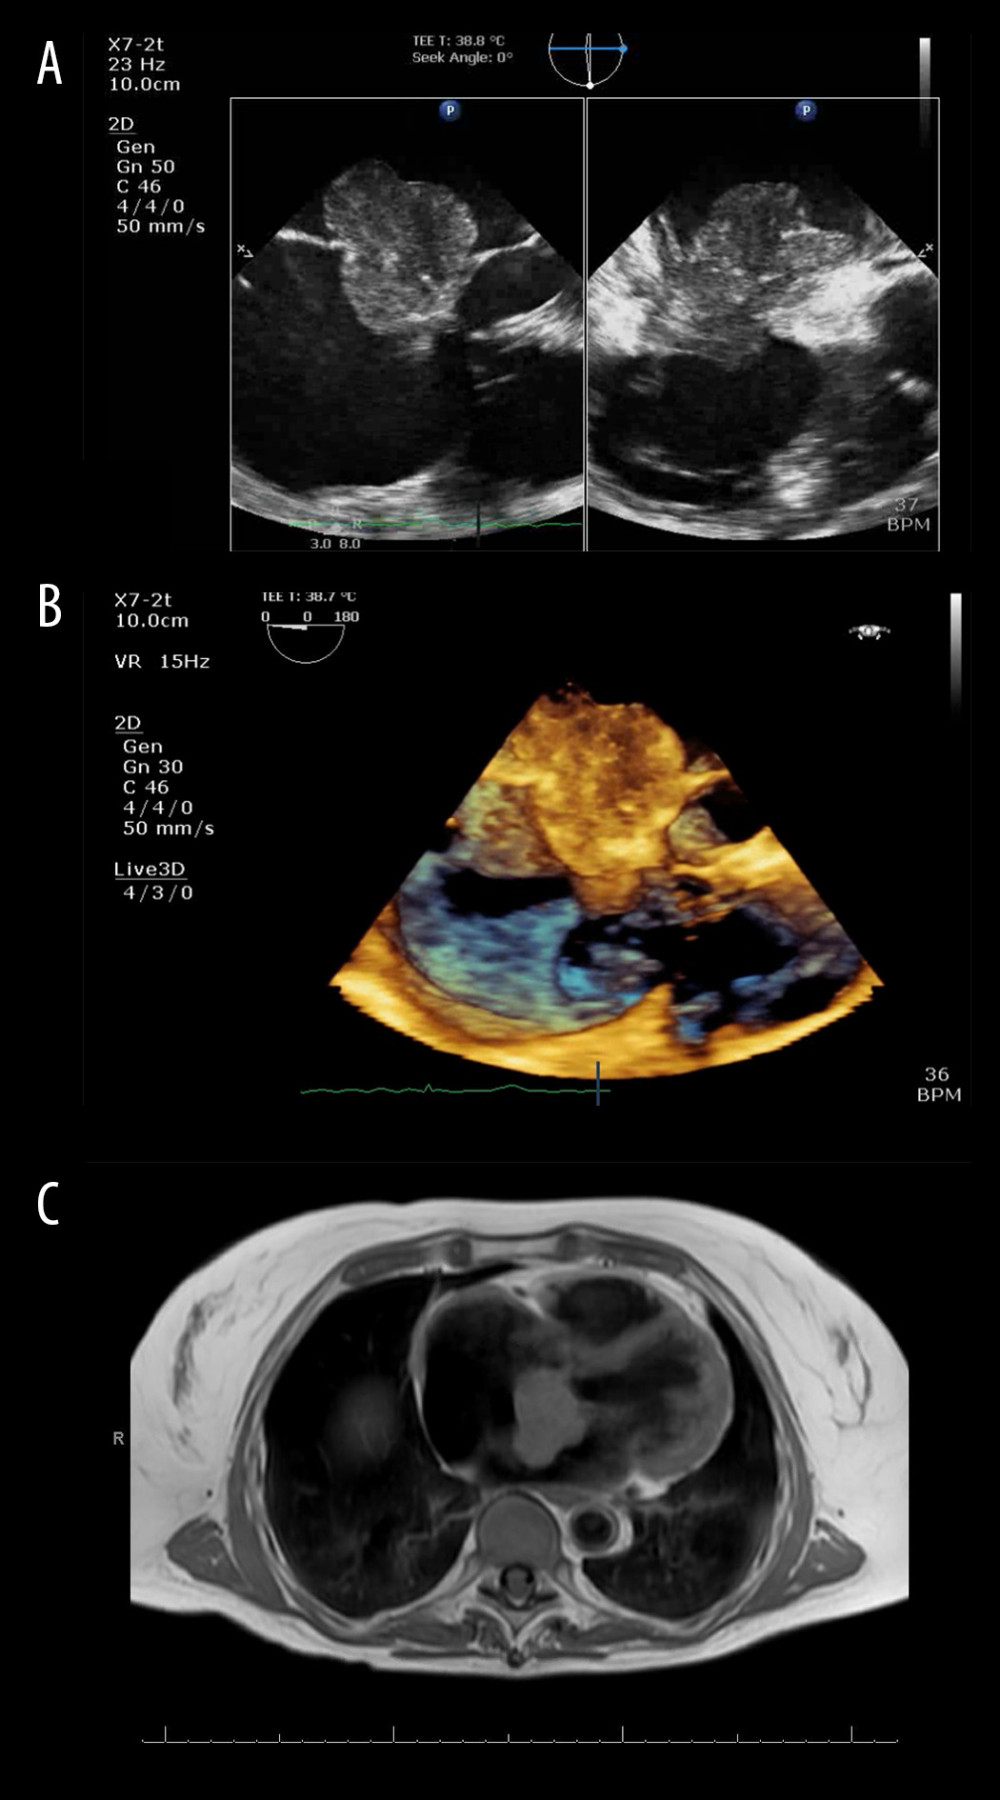 Other cardiac imaging demonstrated the cardiac mass. (A) Transesophageal echocardiogram re-demonstrated the mass. (B) Three-dimensional acquisition of the cardiac mass obtained during transesophageal echocardiogram. (C) Cardiac magnetic resonance imaging confirmed a 3.8×4.3×5.6 cm mass between the atria.